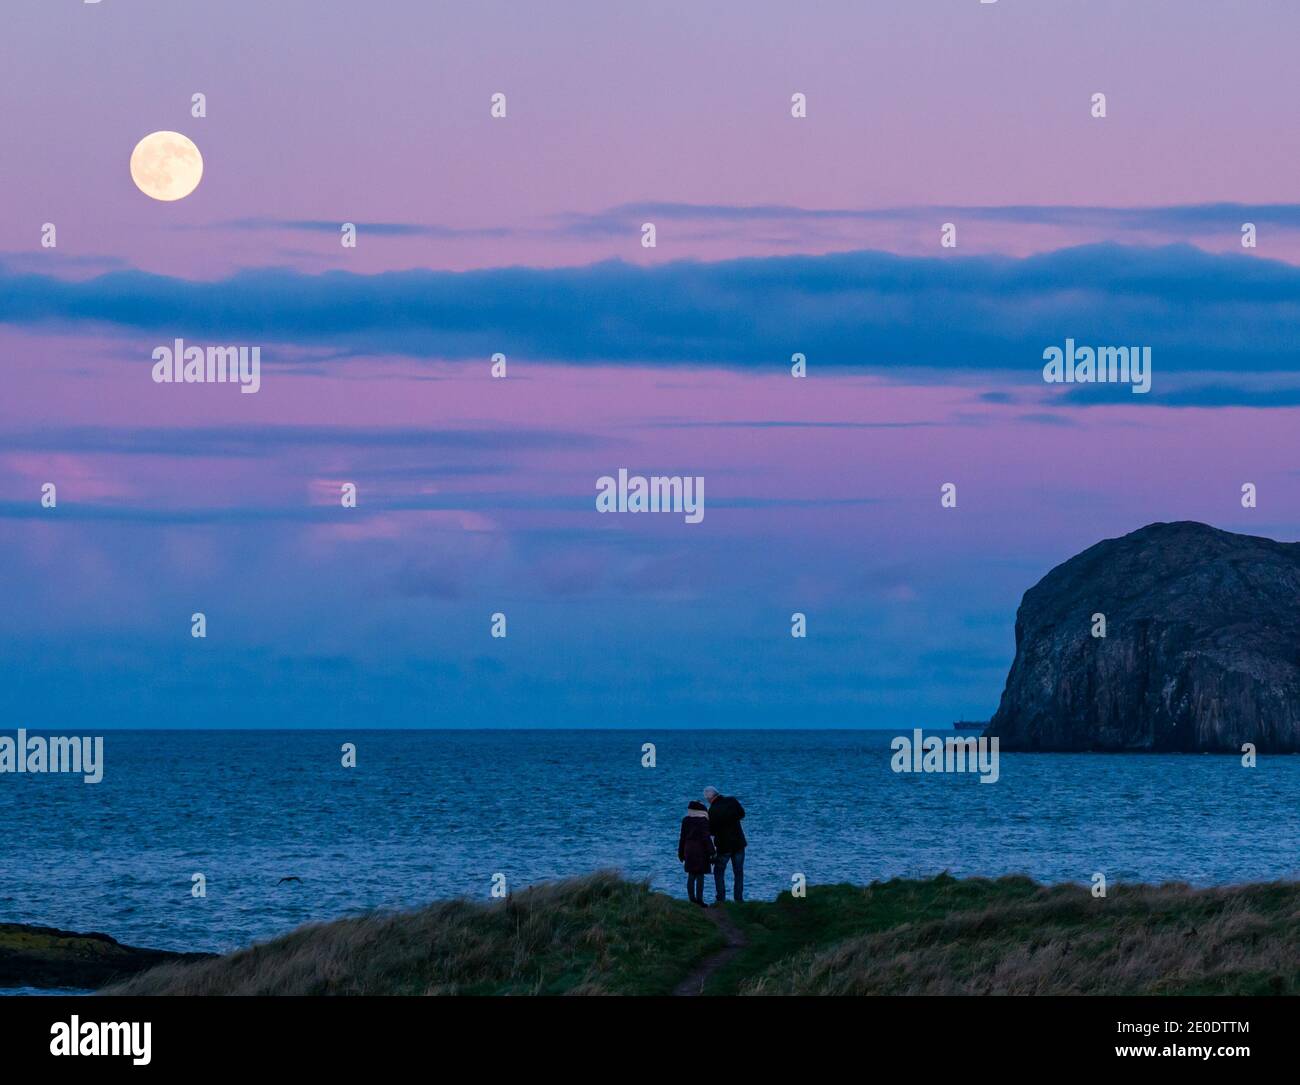 A full moon rises over Bass Rock island with a colourful sunset, Firth of Forth, Scotland, UK Stock Photo